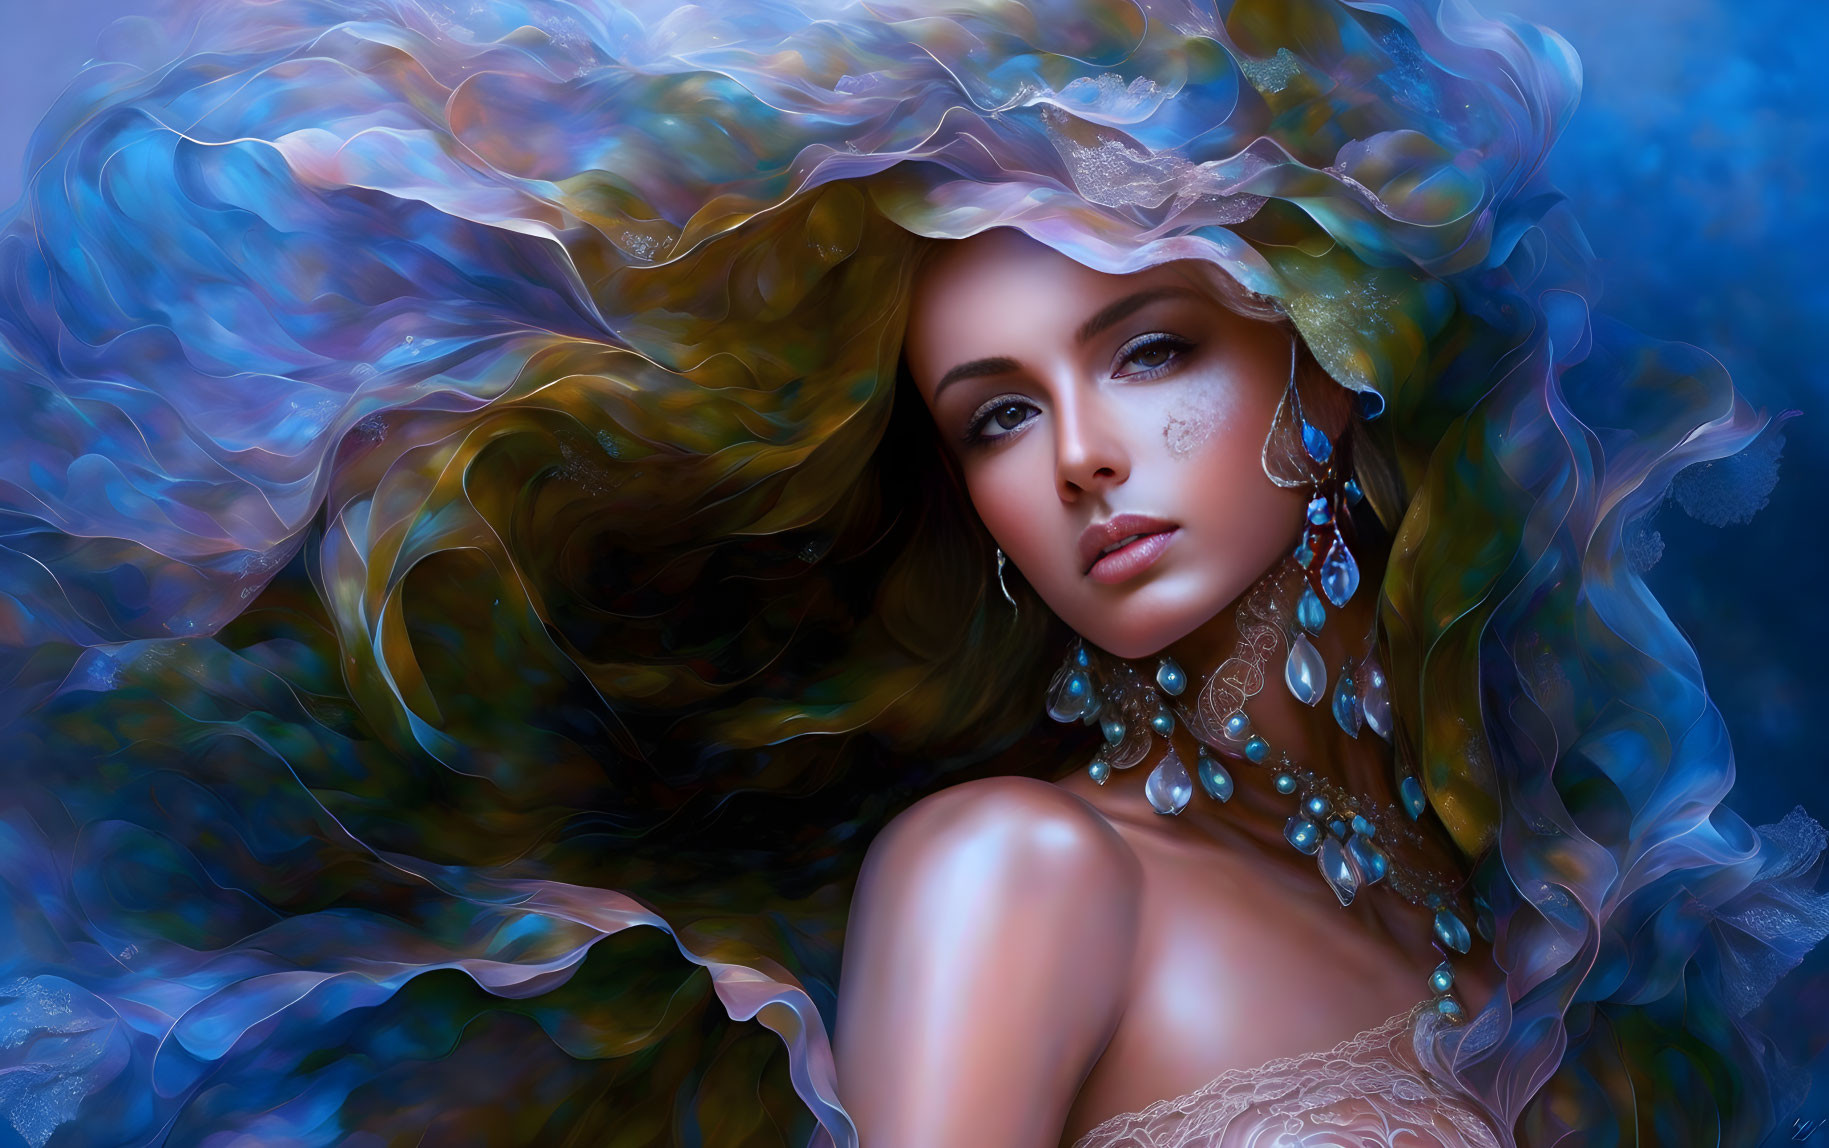 Digital Artwork: Woman with Flowing Hair and Ethereal Attire